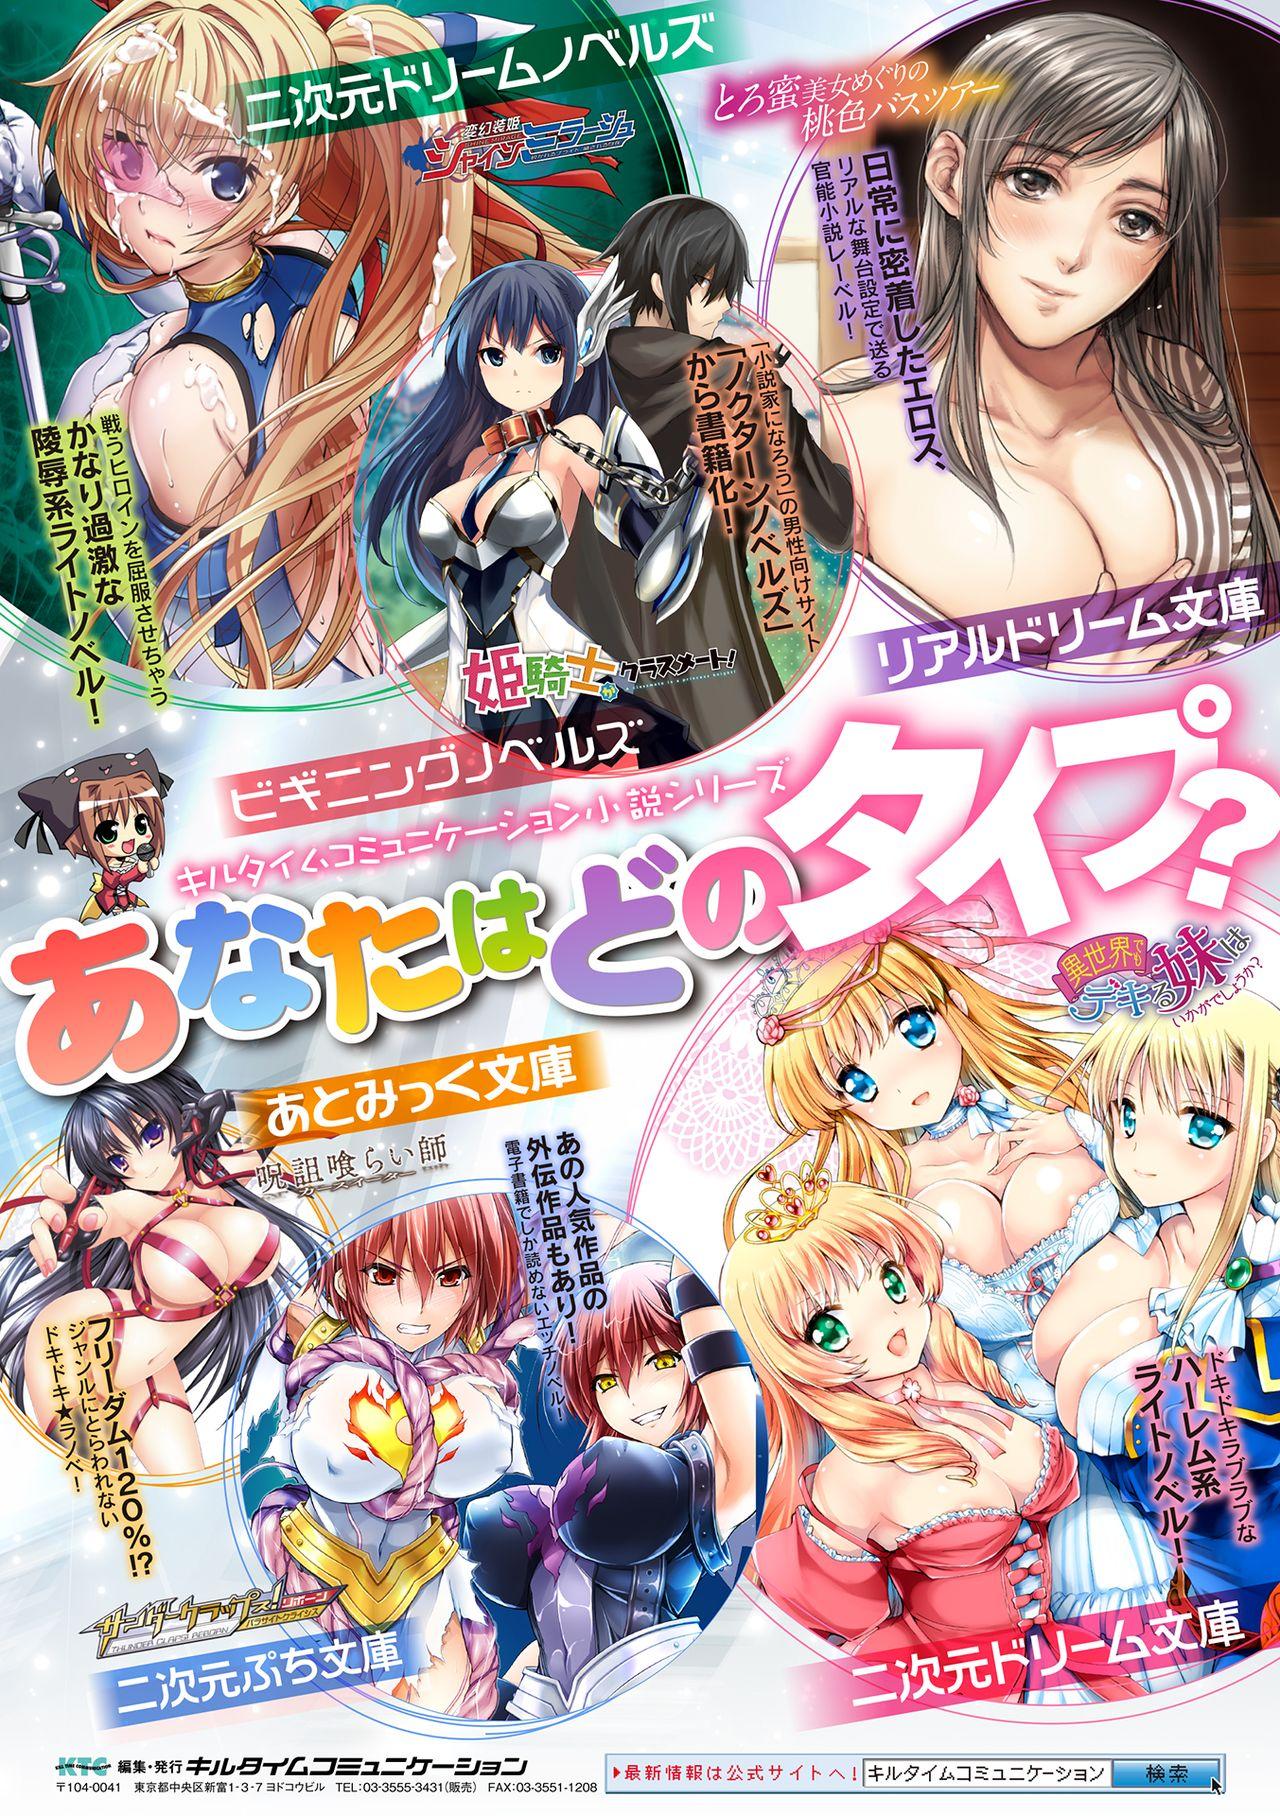 Spycam [Anthology] Loli-babaa Kyousei Tanetsuke Ecchi! | Loli-babaa Forced Impregnation Sex Vol. 1 [English] {CapableScoutMan & bigk40k} [Digital] Old And Young - Page 96